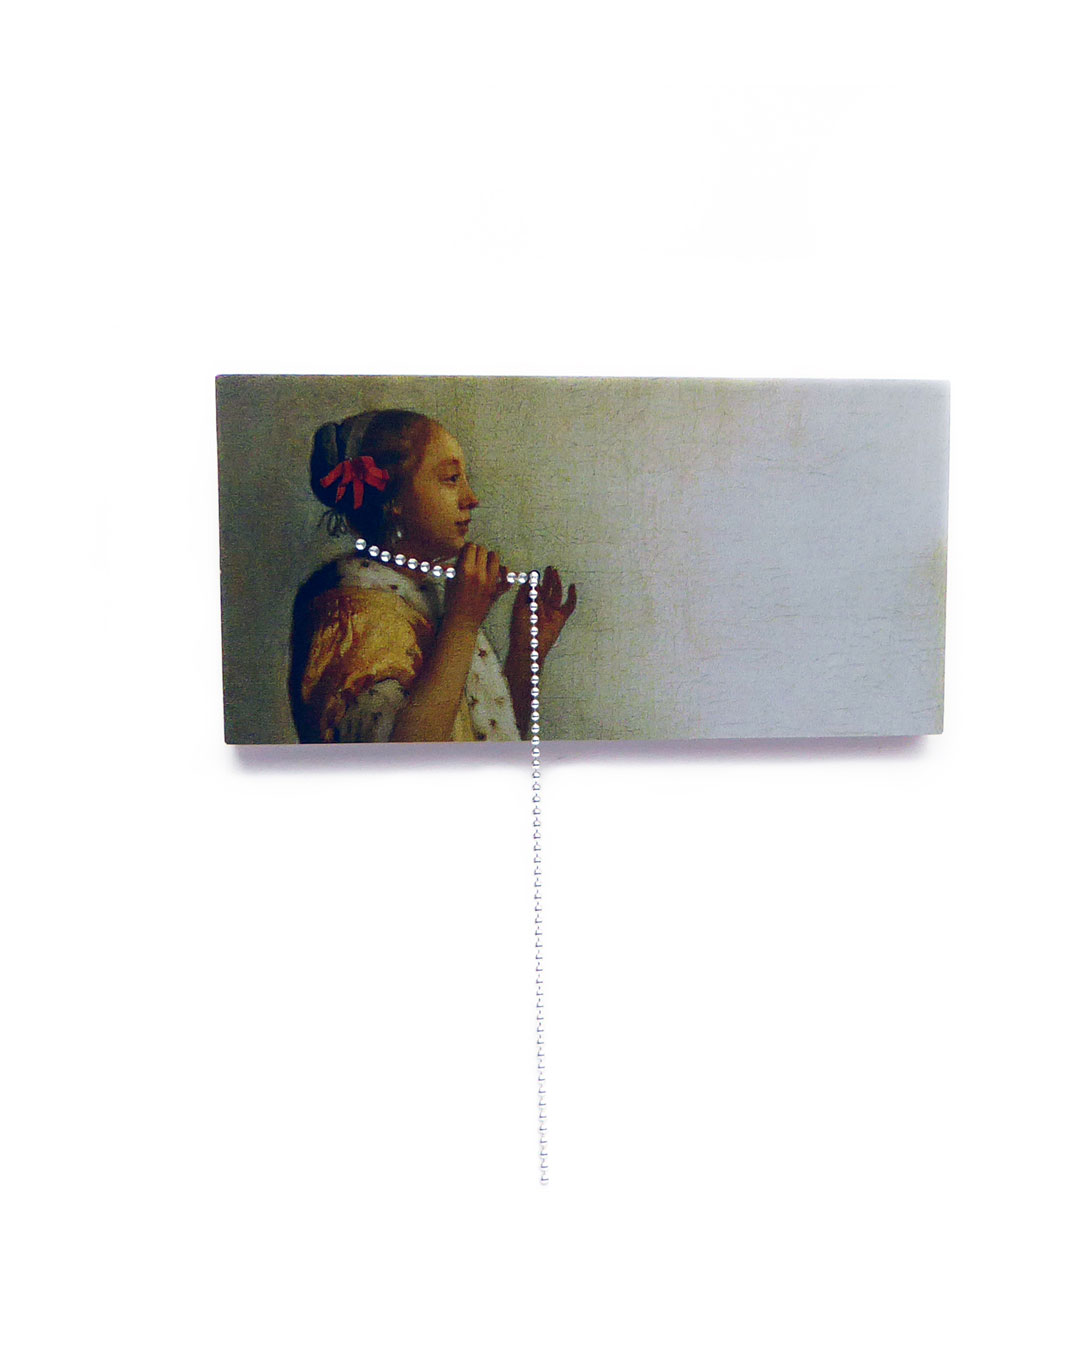 Herman Hermsen, Girl with an Amazing Long Necklace, 2018, brooch; print on aluminium, wood, silver, 87 x 80 x 13 mm, €300